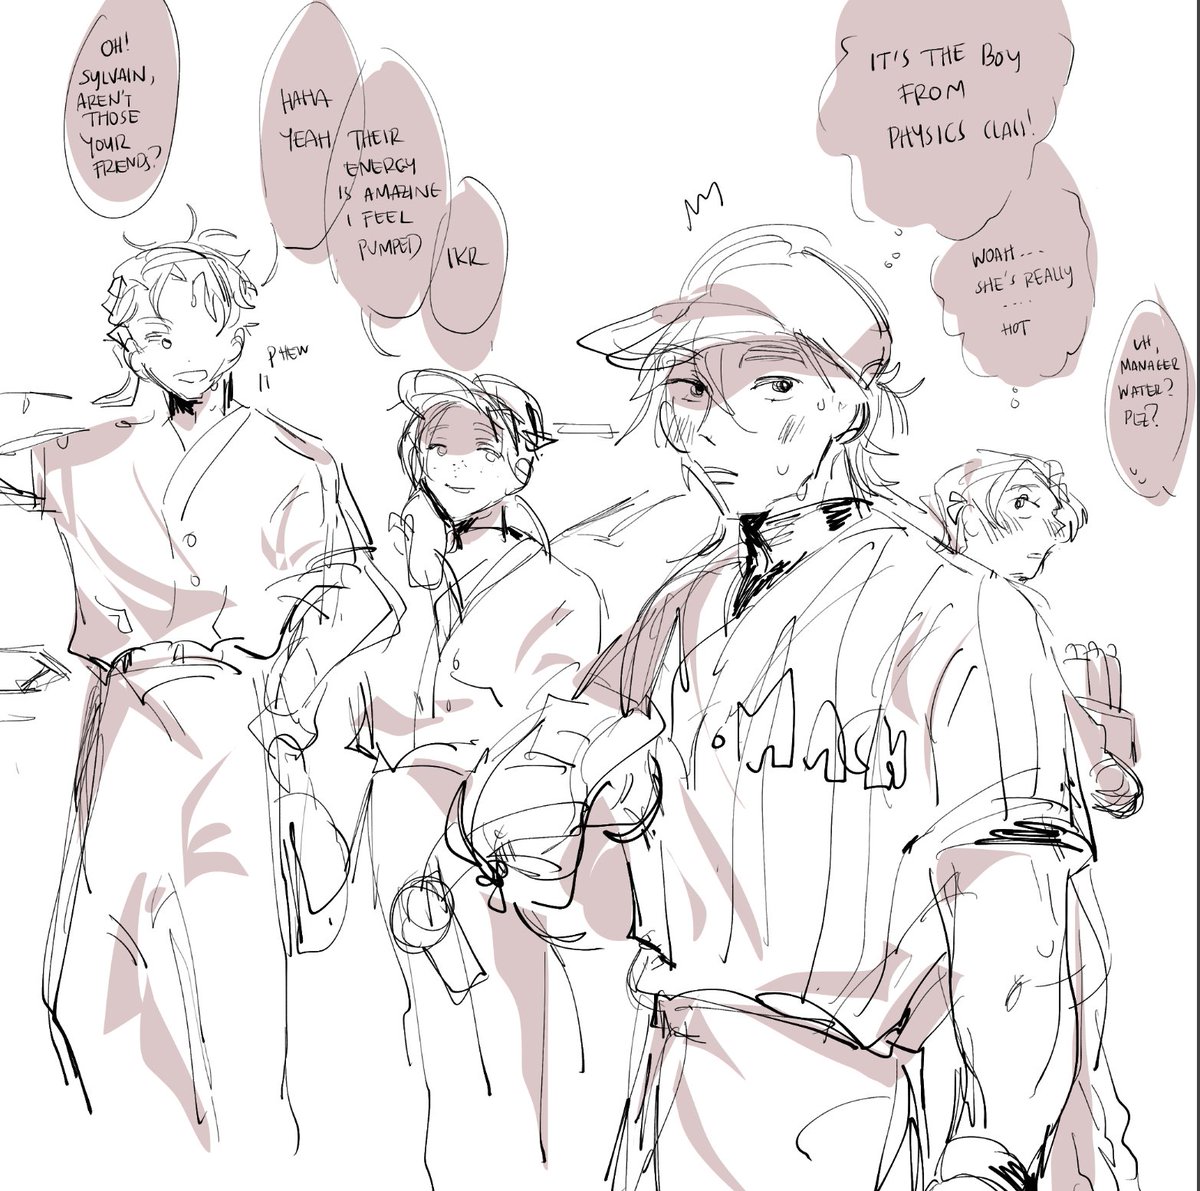 fe3h modern college au but also #dimiclaude college au ? mostly bl with hilda and claude here but the gist of the houses is that BL are part of the baseball team, GD became friends after meeting by joining/trying a dnd campaign, and BE play m/a/plestory together as a guild 